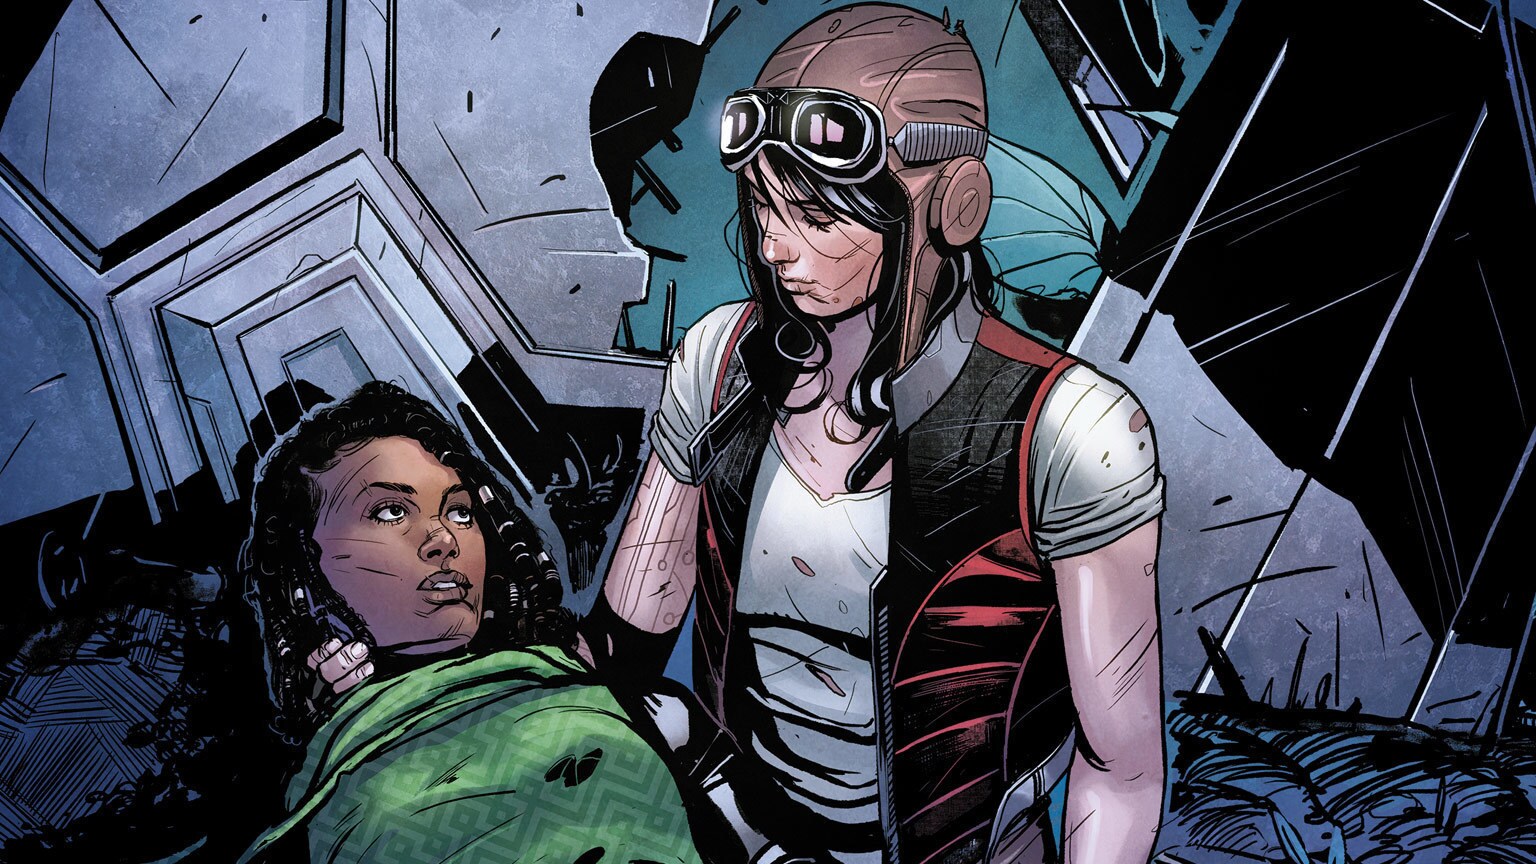 Aphra and Sana Starros Cheat Death in Marvel’s Star Wars: Doctor Aphra #9 - Exclusive Preview